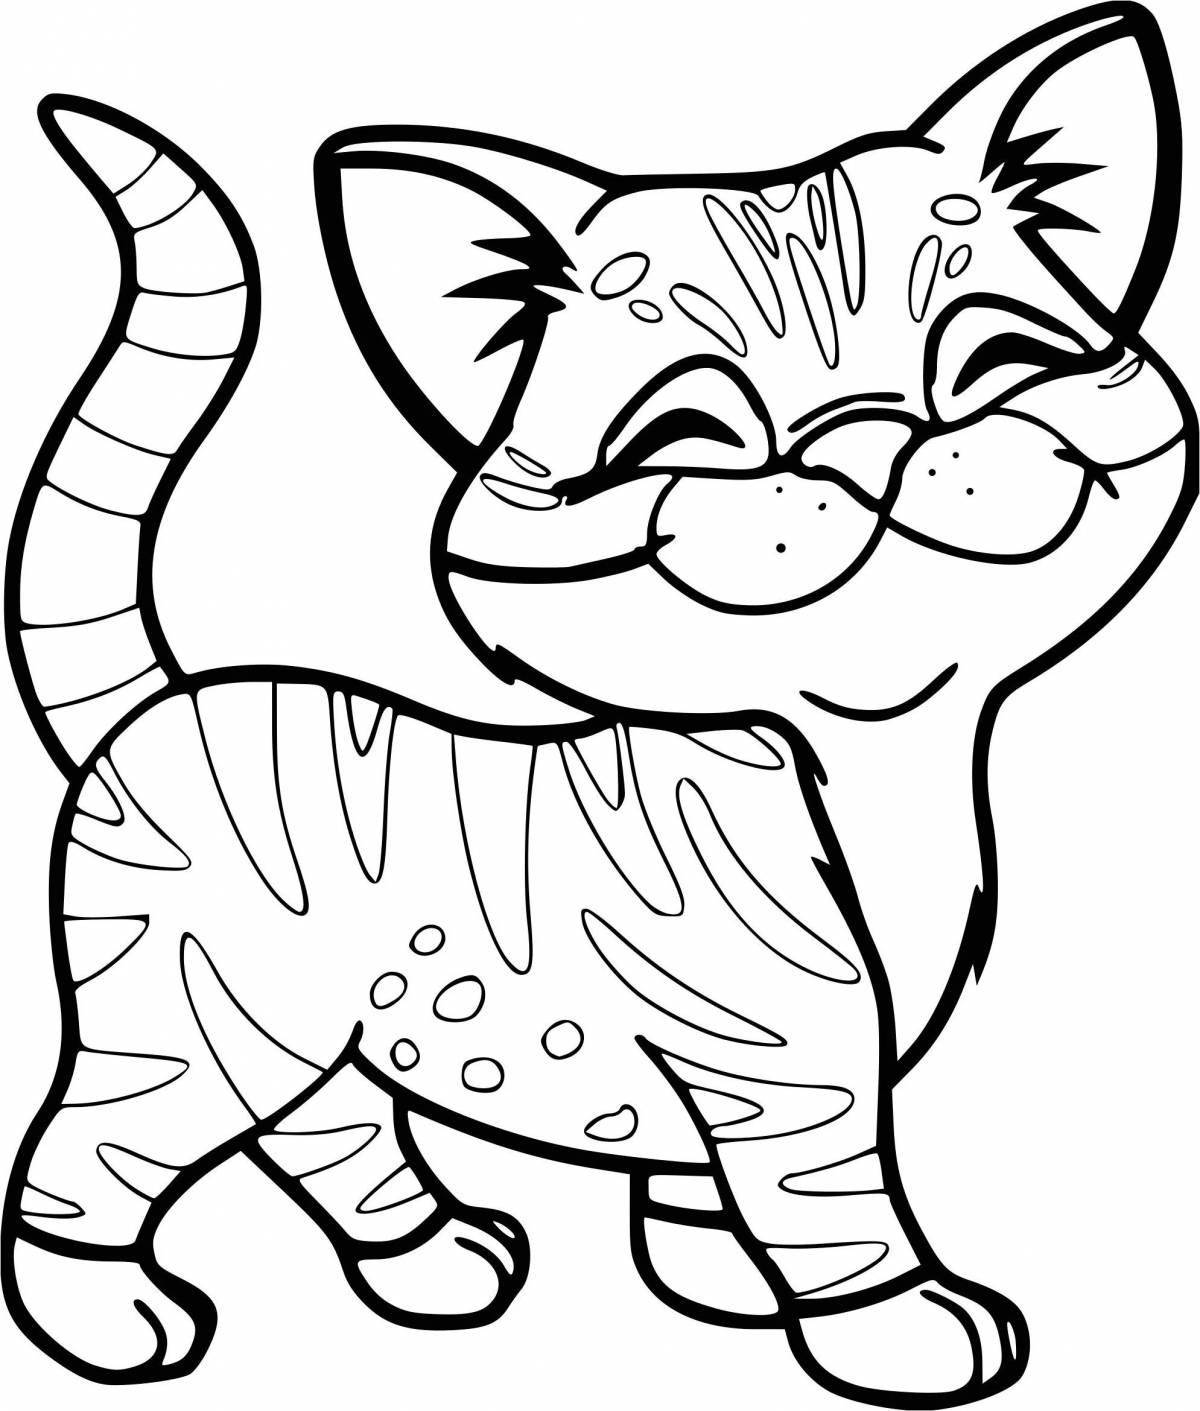 Witty cat coloring pages for boys